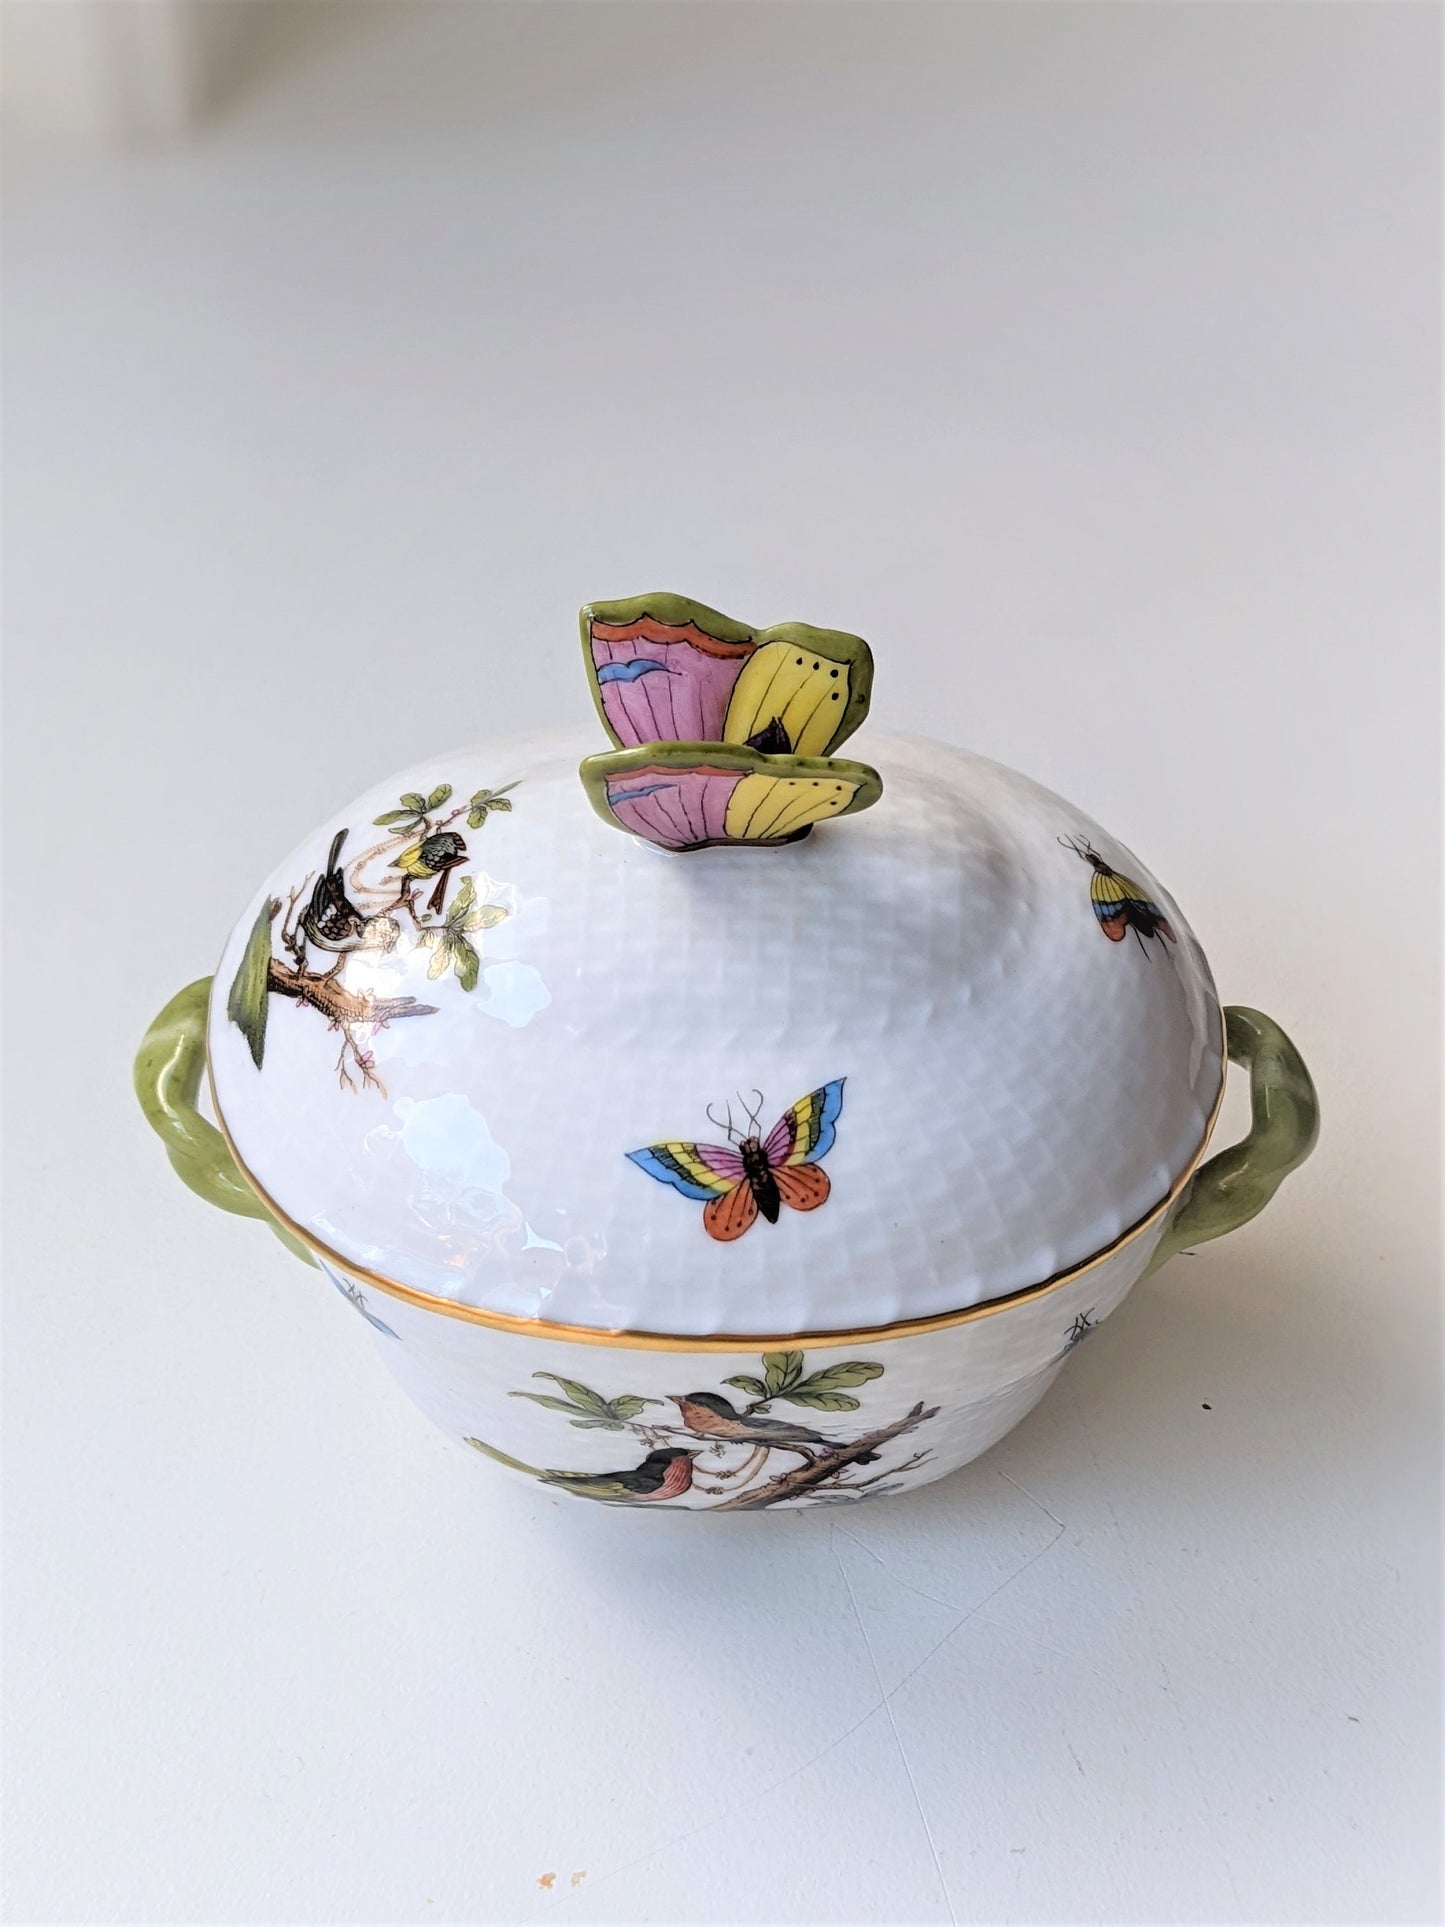 Herend Rothschild Bird Covered Bon Bon Butterfly Finial Bowl, Pettern 6018, Hand Painted, Crafted in Hungary